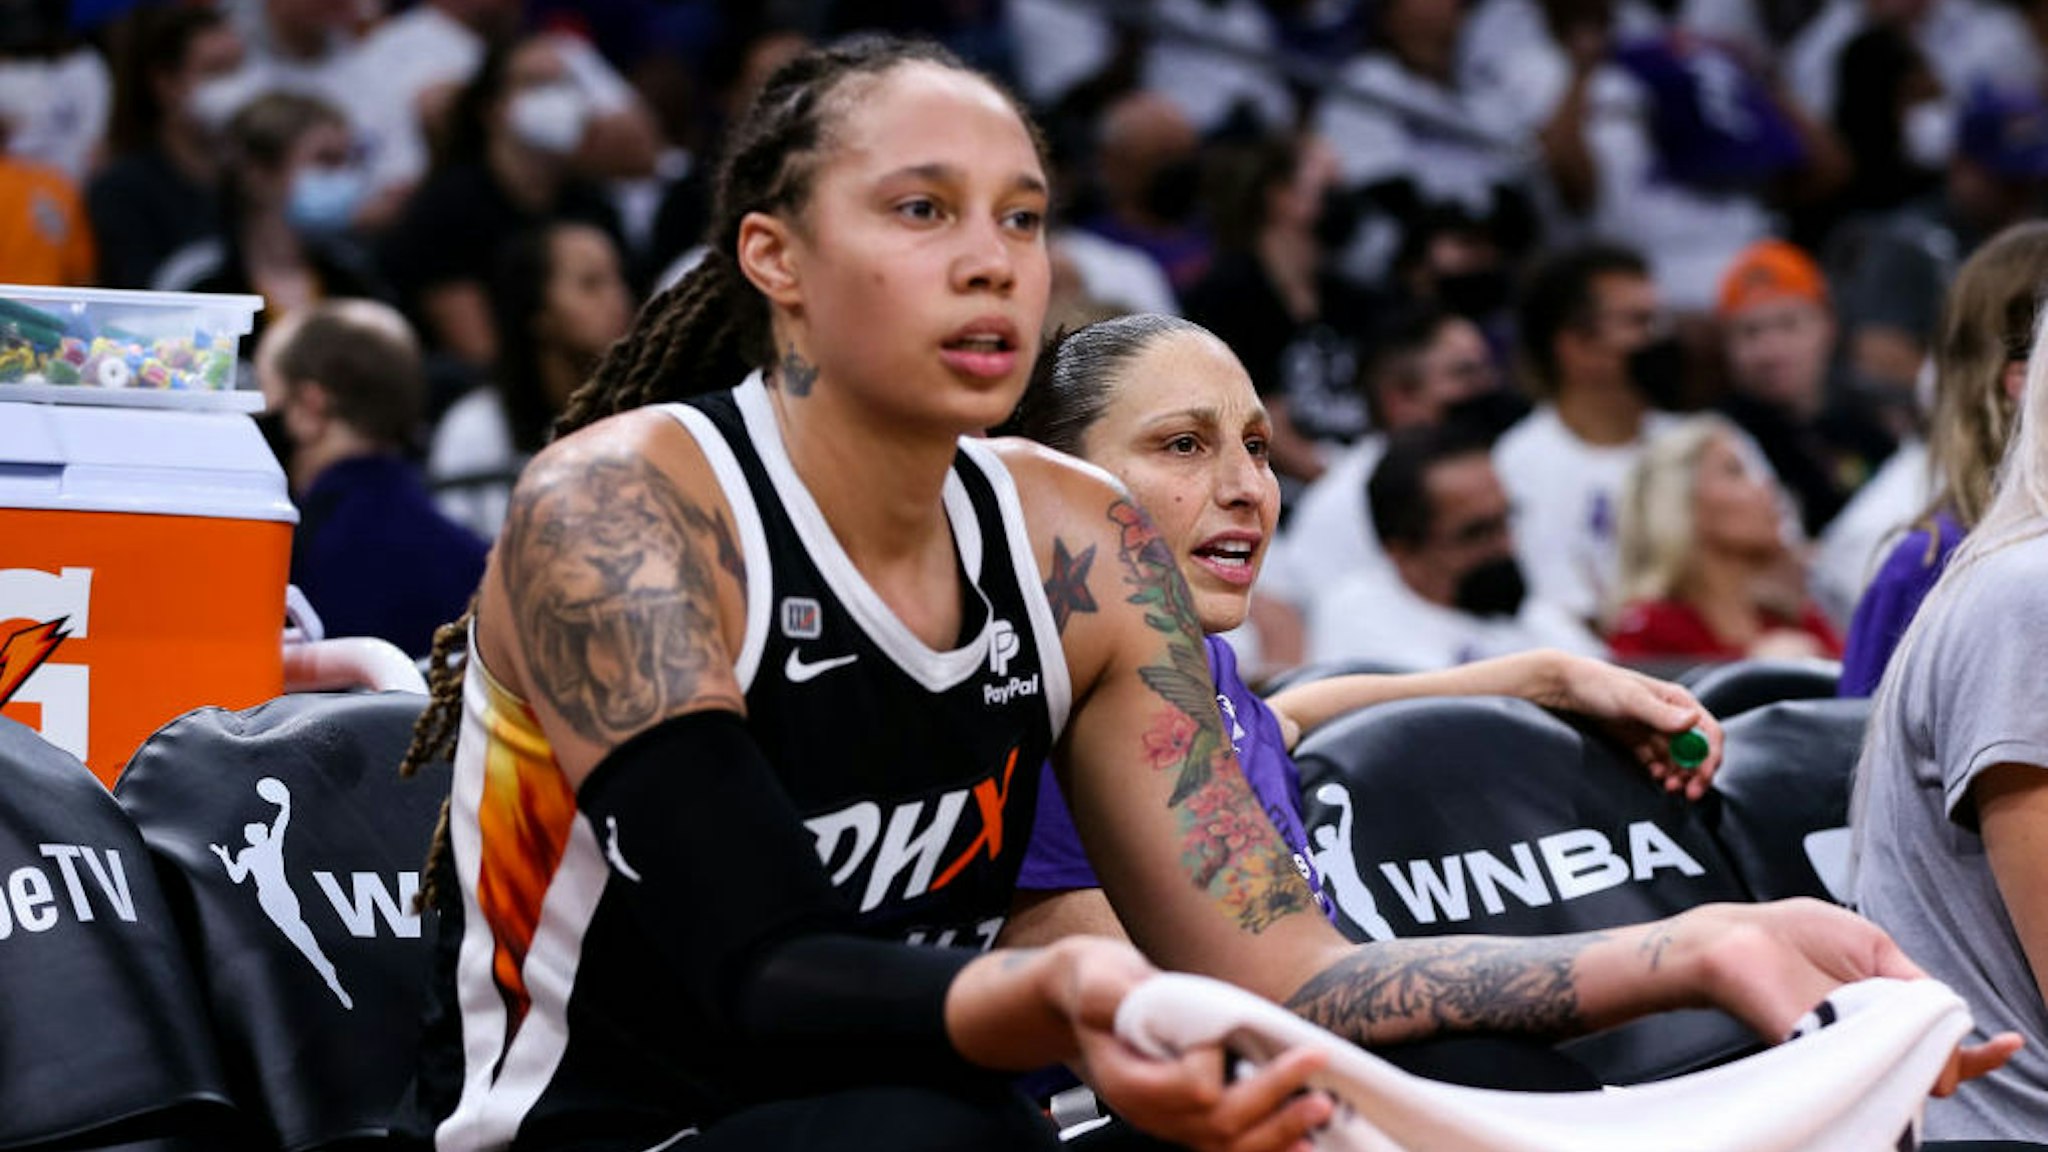 PHOENIX, ARIZONA - OCTOBER 10: Brittney Griner #42 and Diana Taurasi #3 of the Phoenix Mercury reacts to a foul call in the second half during the game against the Chicago Sky at Footprint Center on October 10, 2021 in Phoenix, Arizona. NOTE TO USER: User expressly acknowledges and agrees that, by downloading and or using this photograph, User is consenting to the terms and conditions of the Getty Images License Agreement. (Photo by Mike Mattina/Getty Images)